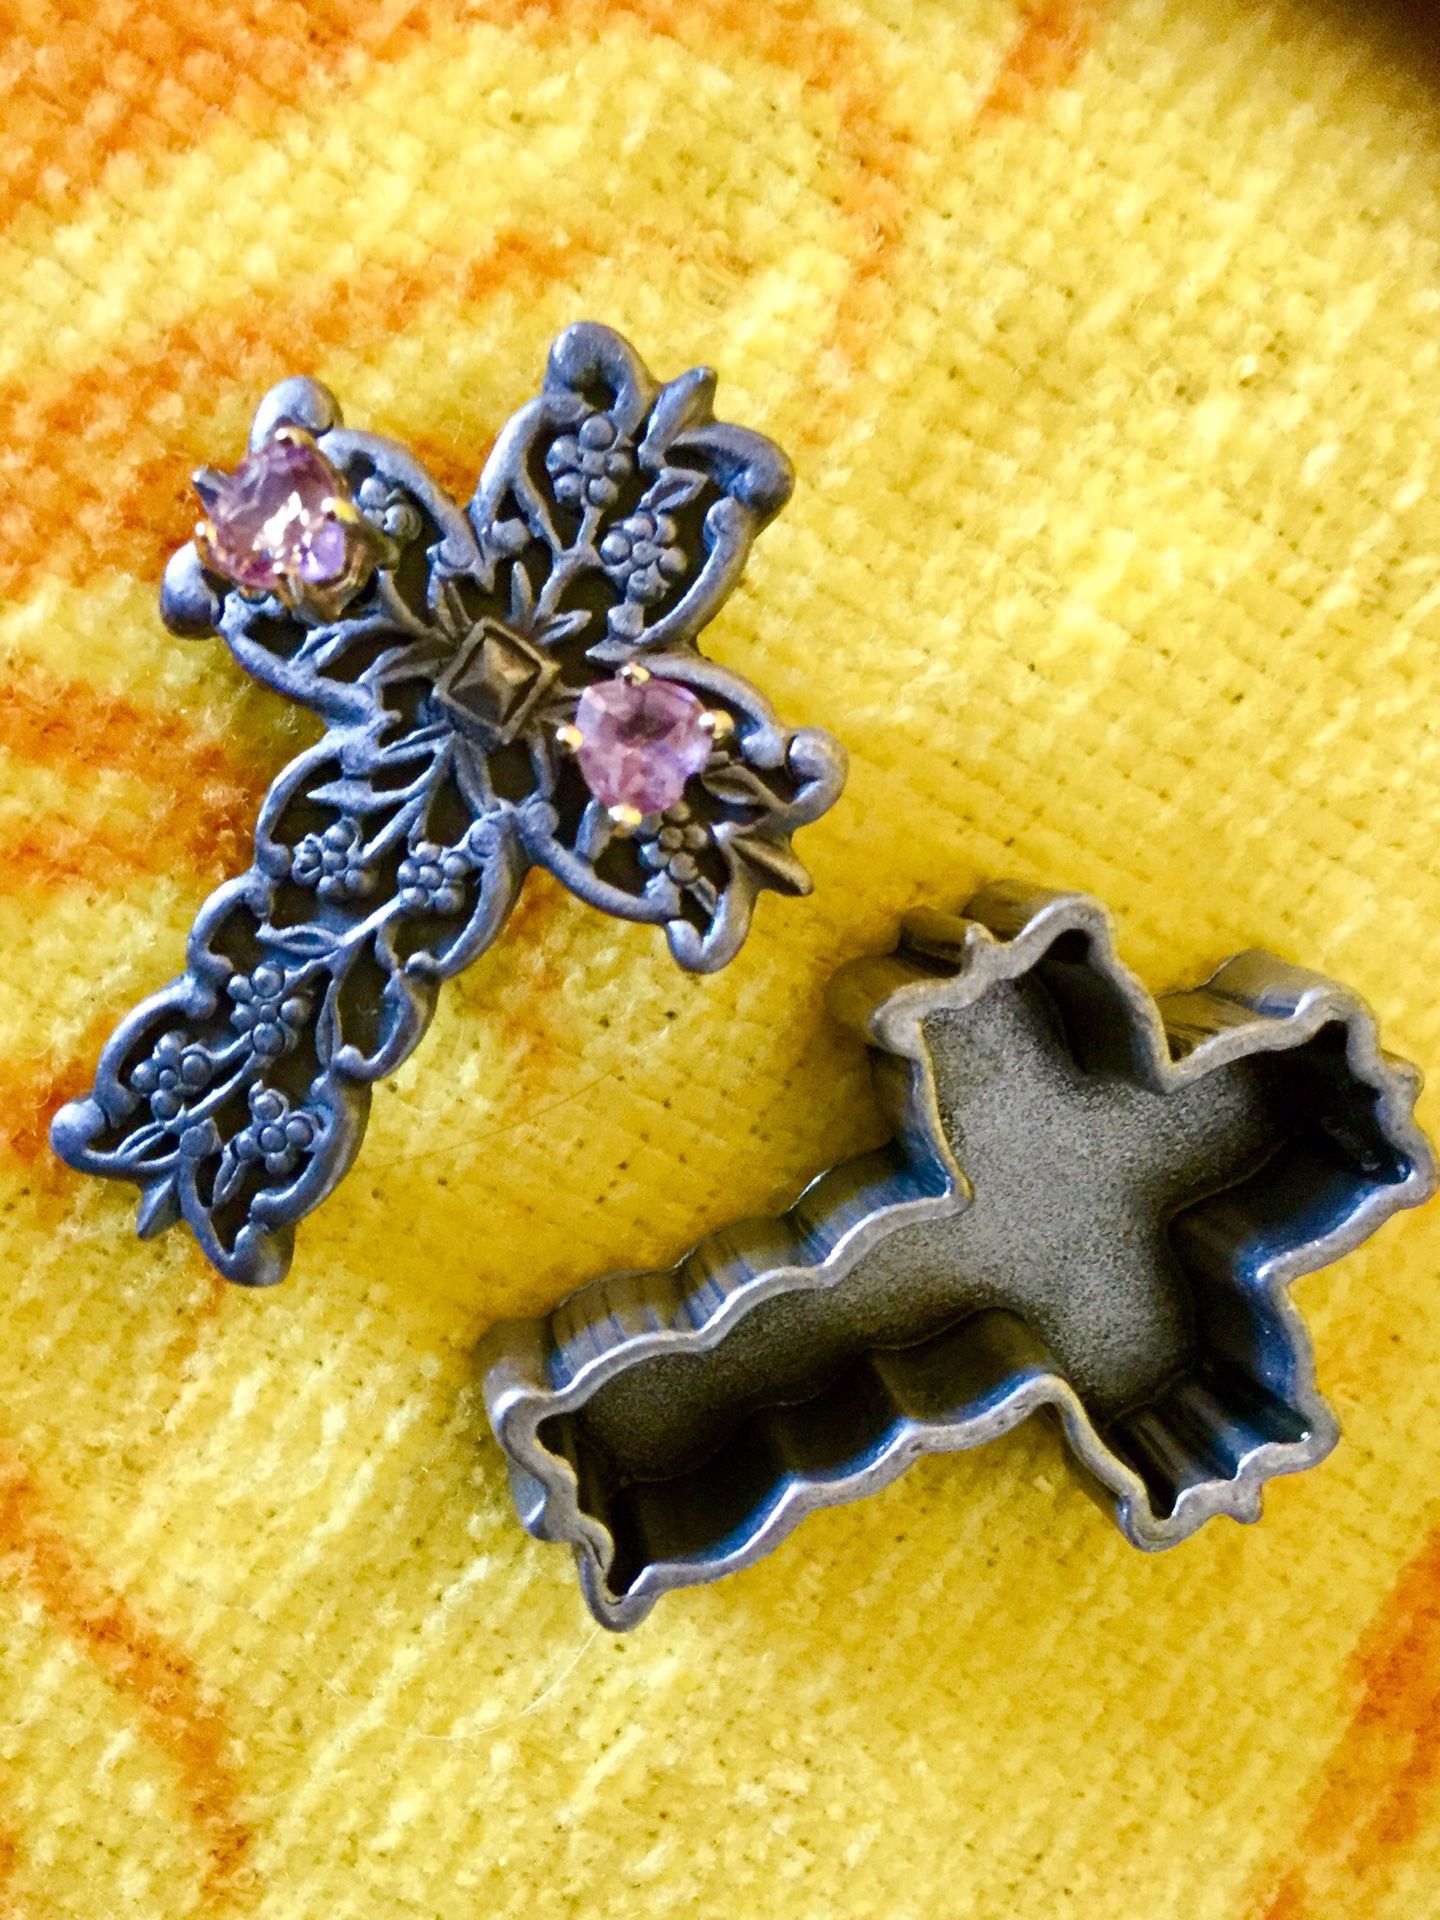 Cross broach with 1 pair amethyst gemstone earrings / Also turns in to a box holding earrings 🌿🌷🌿 3 in one together